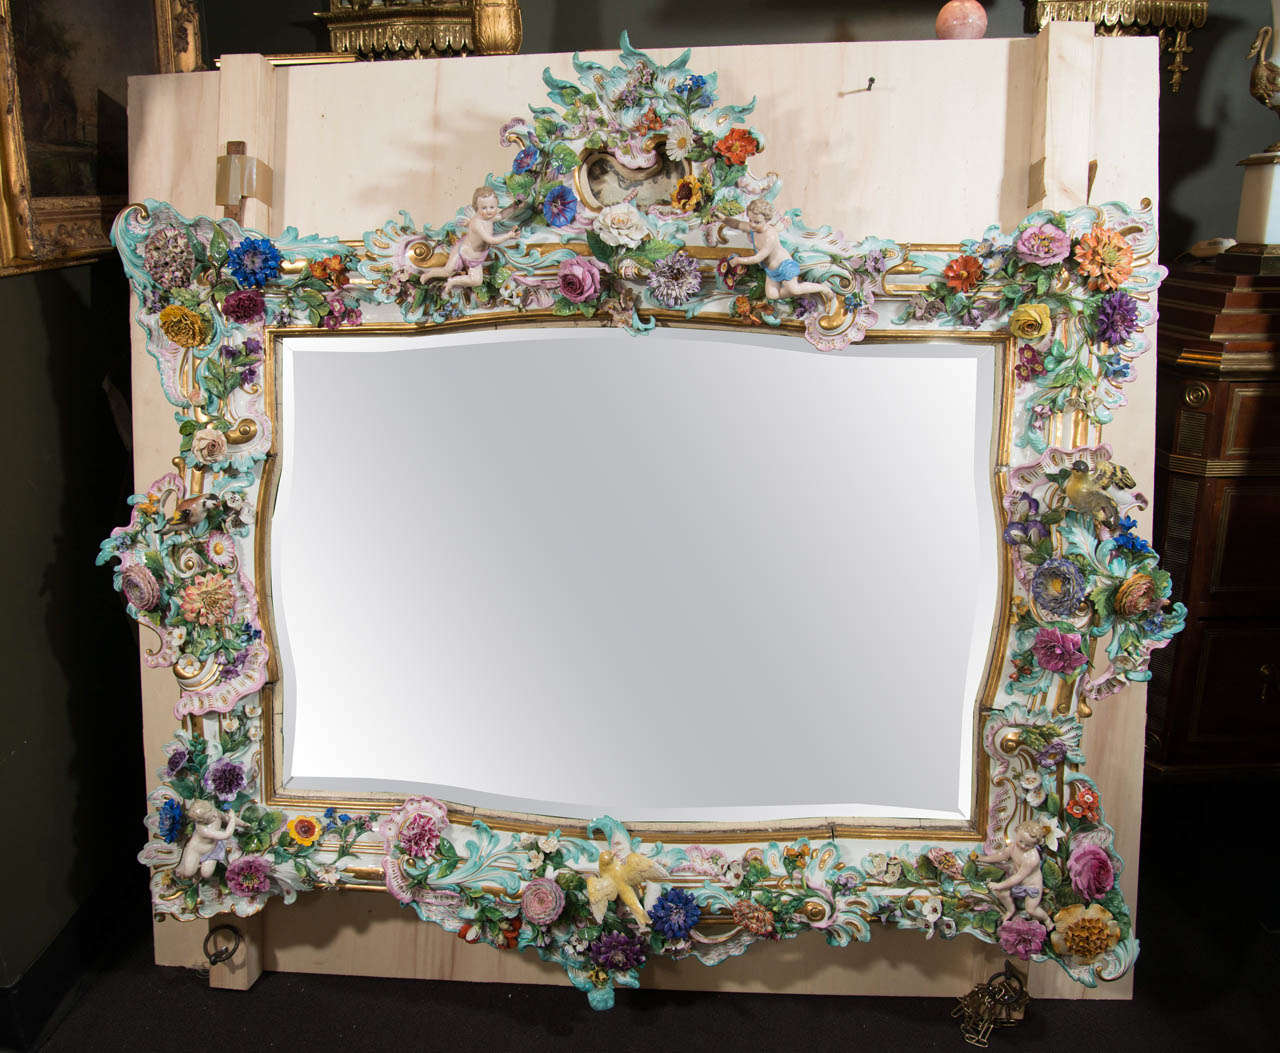 A Highly Important & Palatial Antique German Meissen Figural gilded , polychromed enameled Porcelain of exceptional craftsmanship and unusual shape. This unique mirror is embellished with figures, birds & adorned with over one thousand hand made